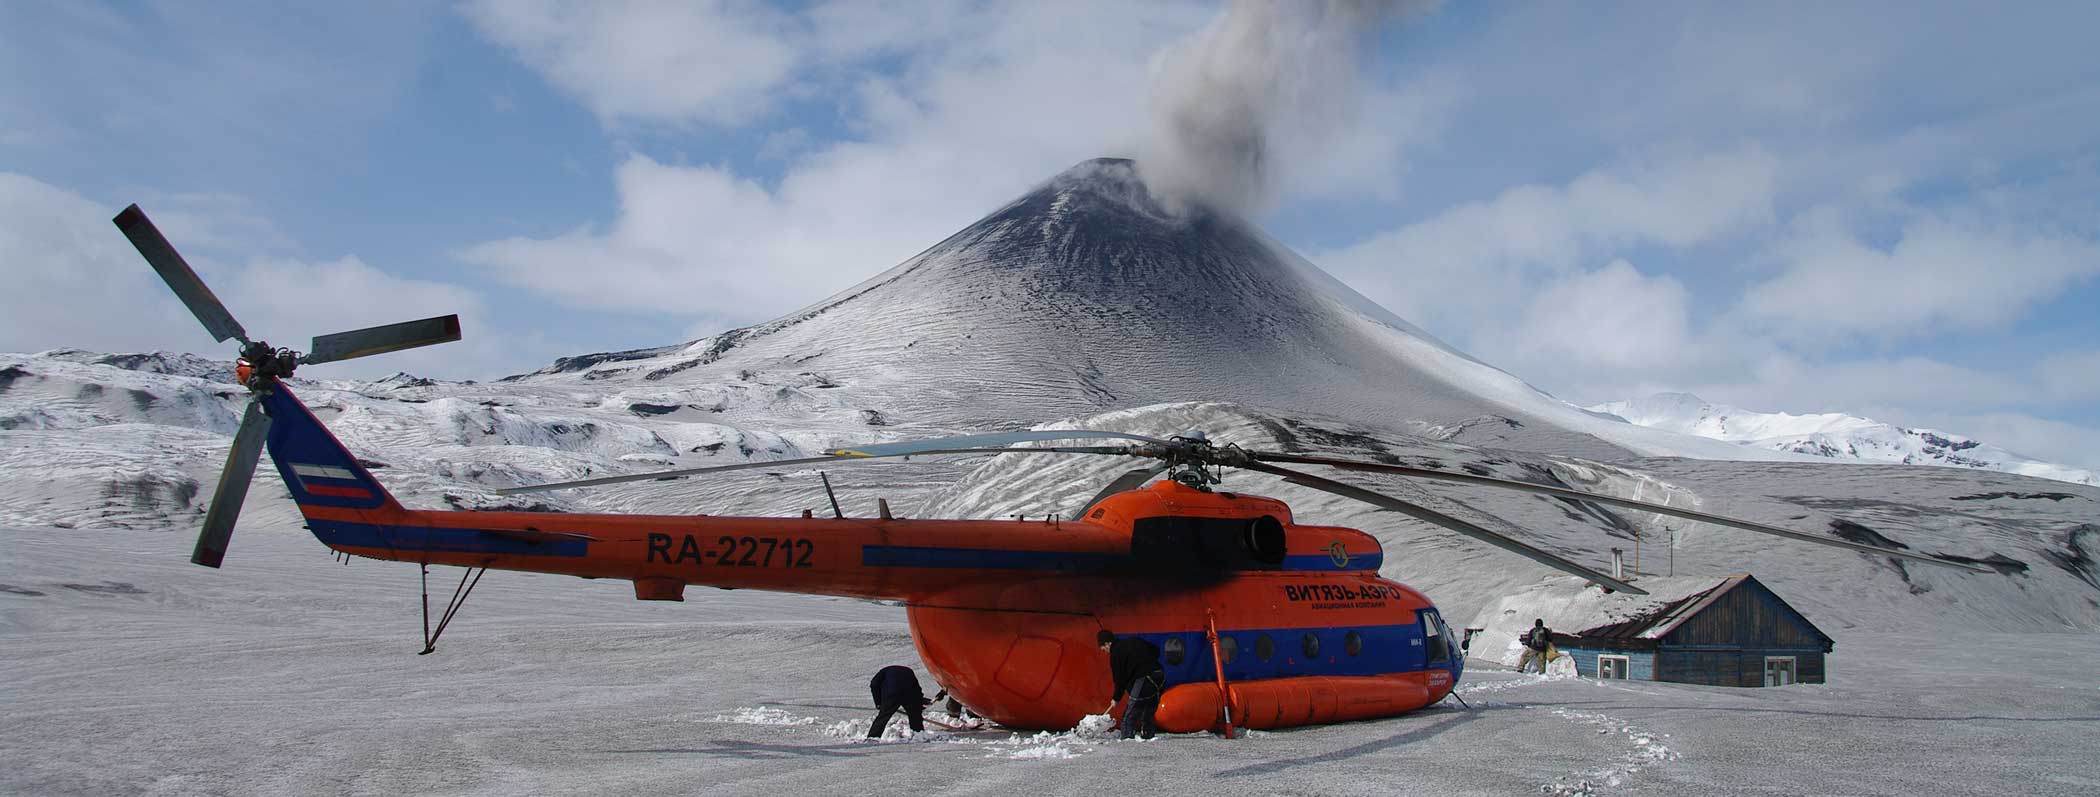 A helicopter landed on the snow outside a remote research camp near a smoking volcano